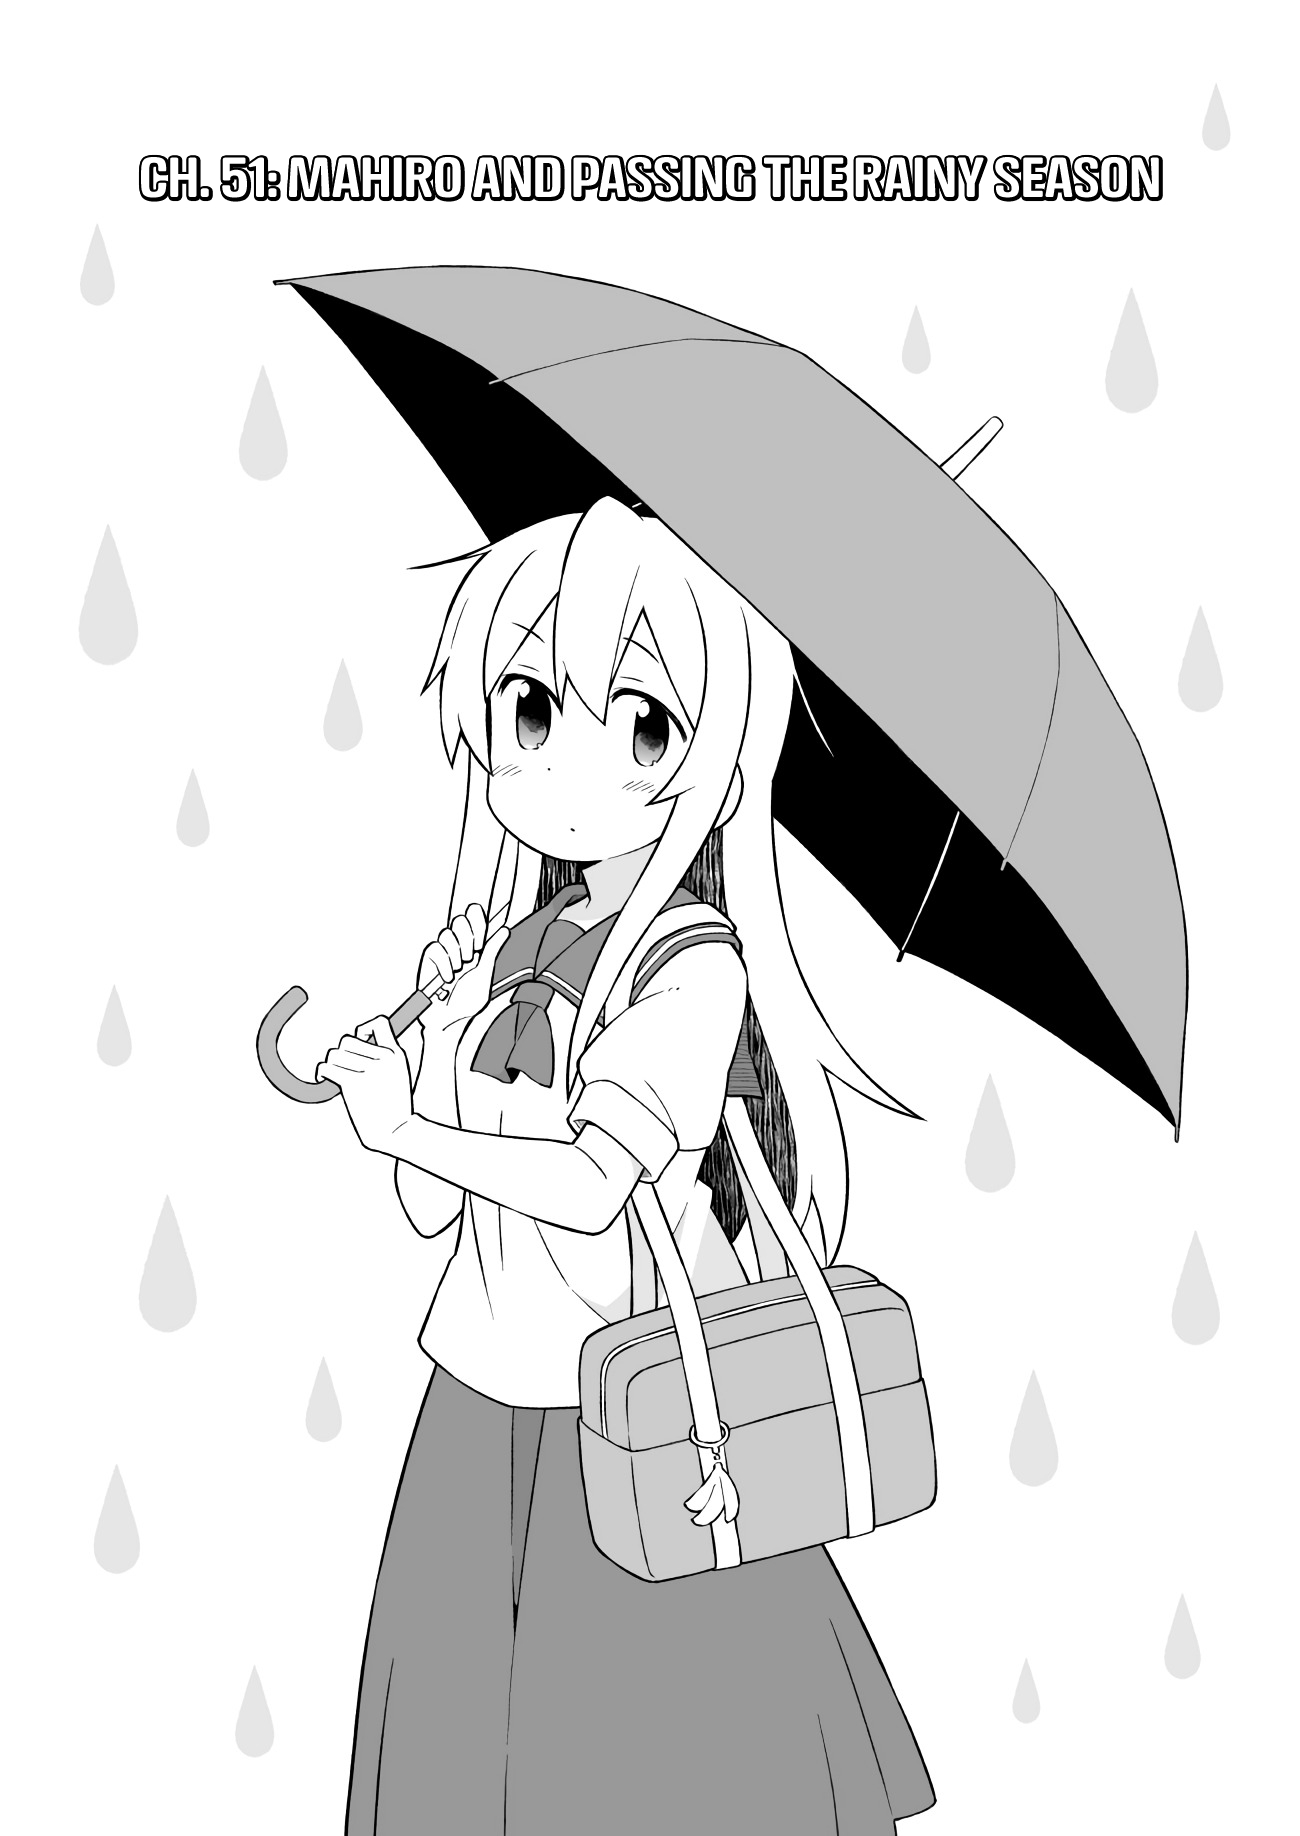 Onii-chan Is Done For! 51 Mahiro and Passing the Rainy Season